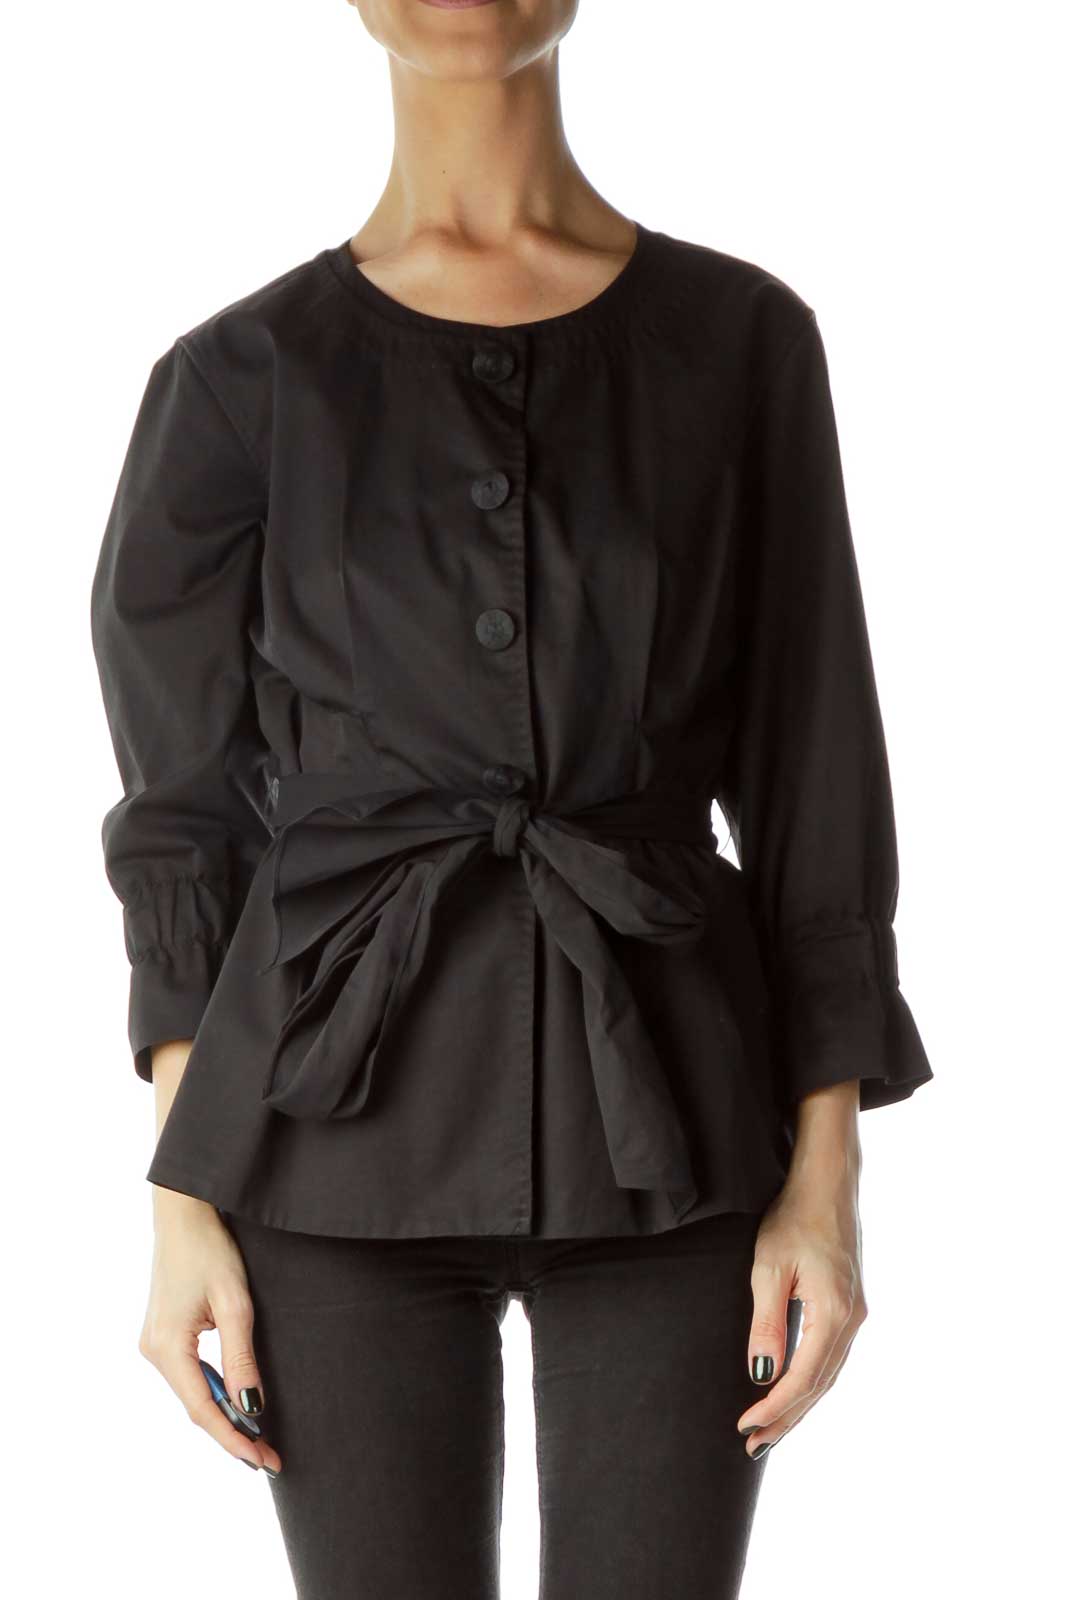 Black 3/4 Sleeve Fitted Jacket Front